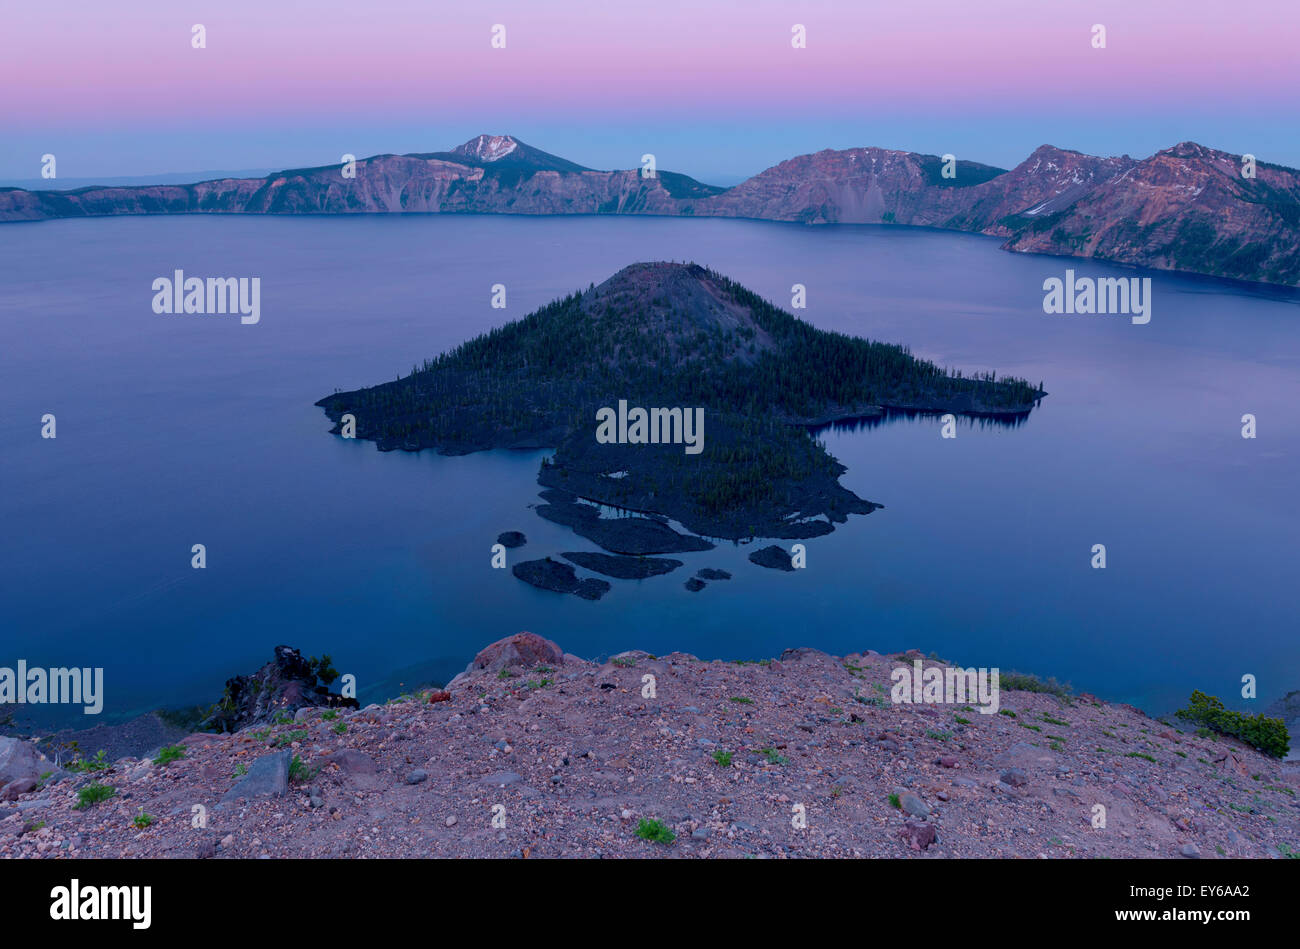 A view of Wizard's Island from the Rim of Crater Lake, Oregon State, USA. Stock Photo